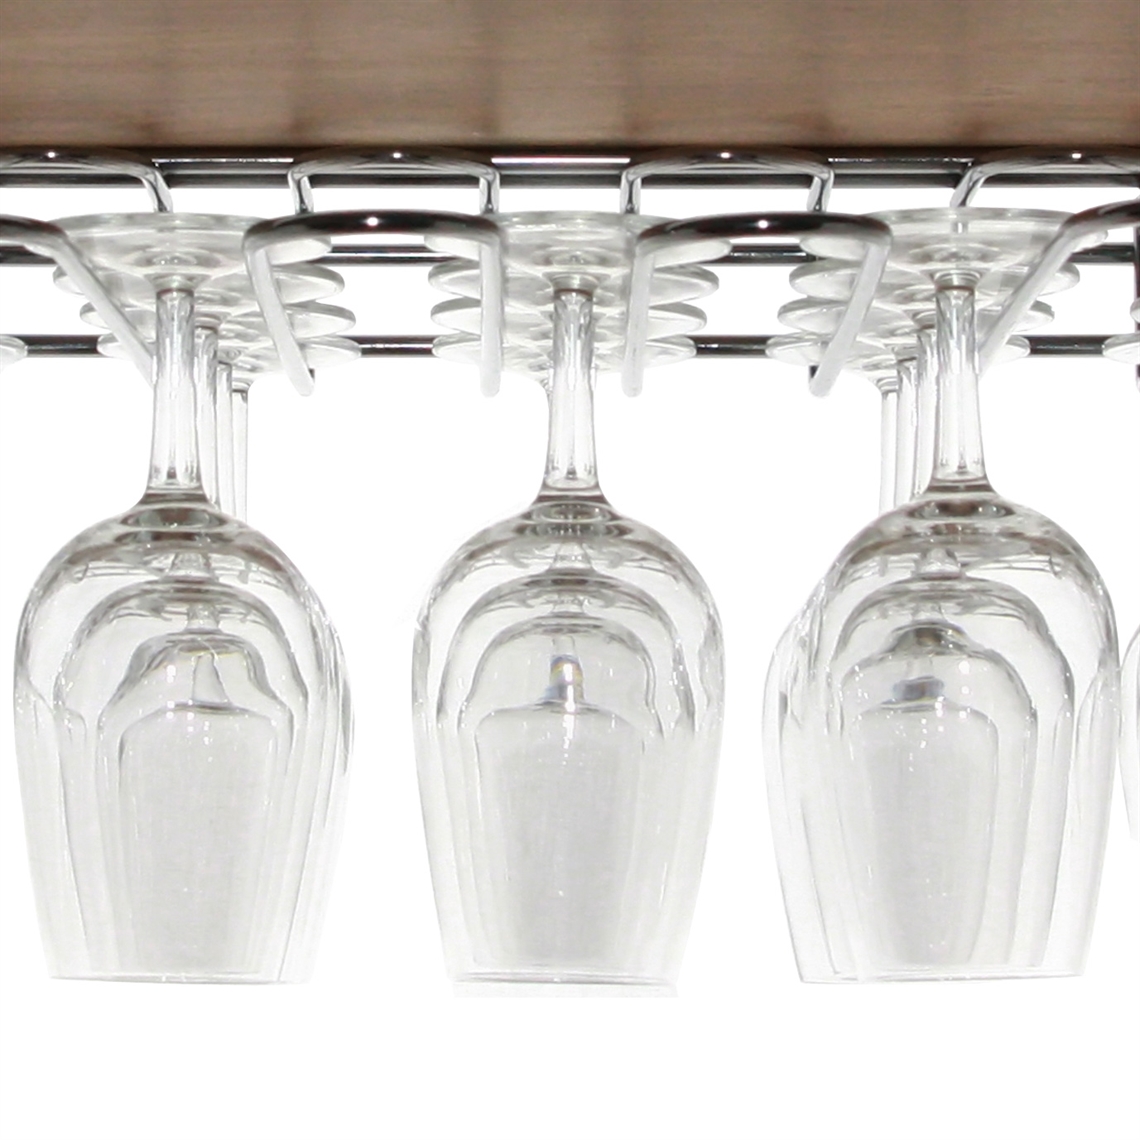 View more ice buckets from our Wine Glass Hanging Racks range